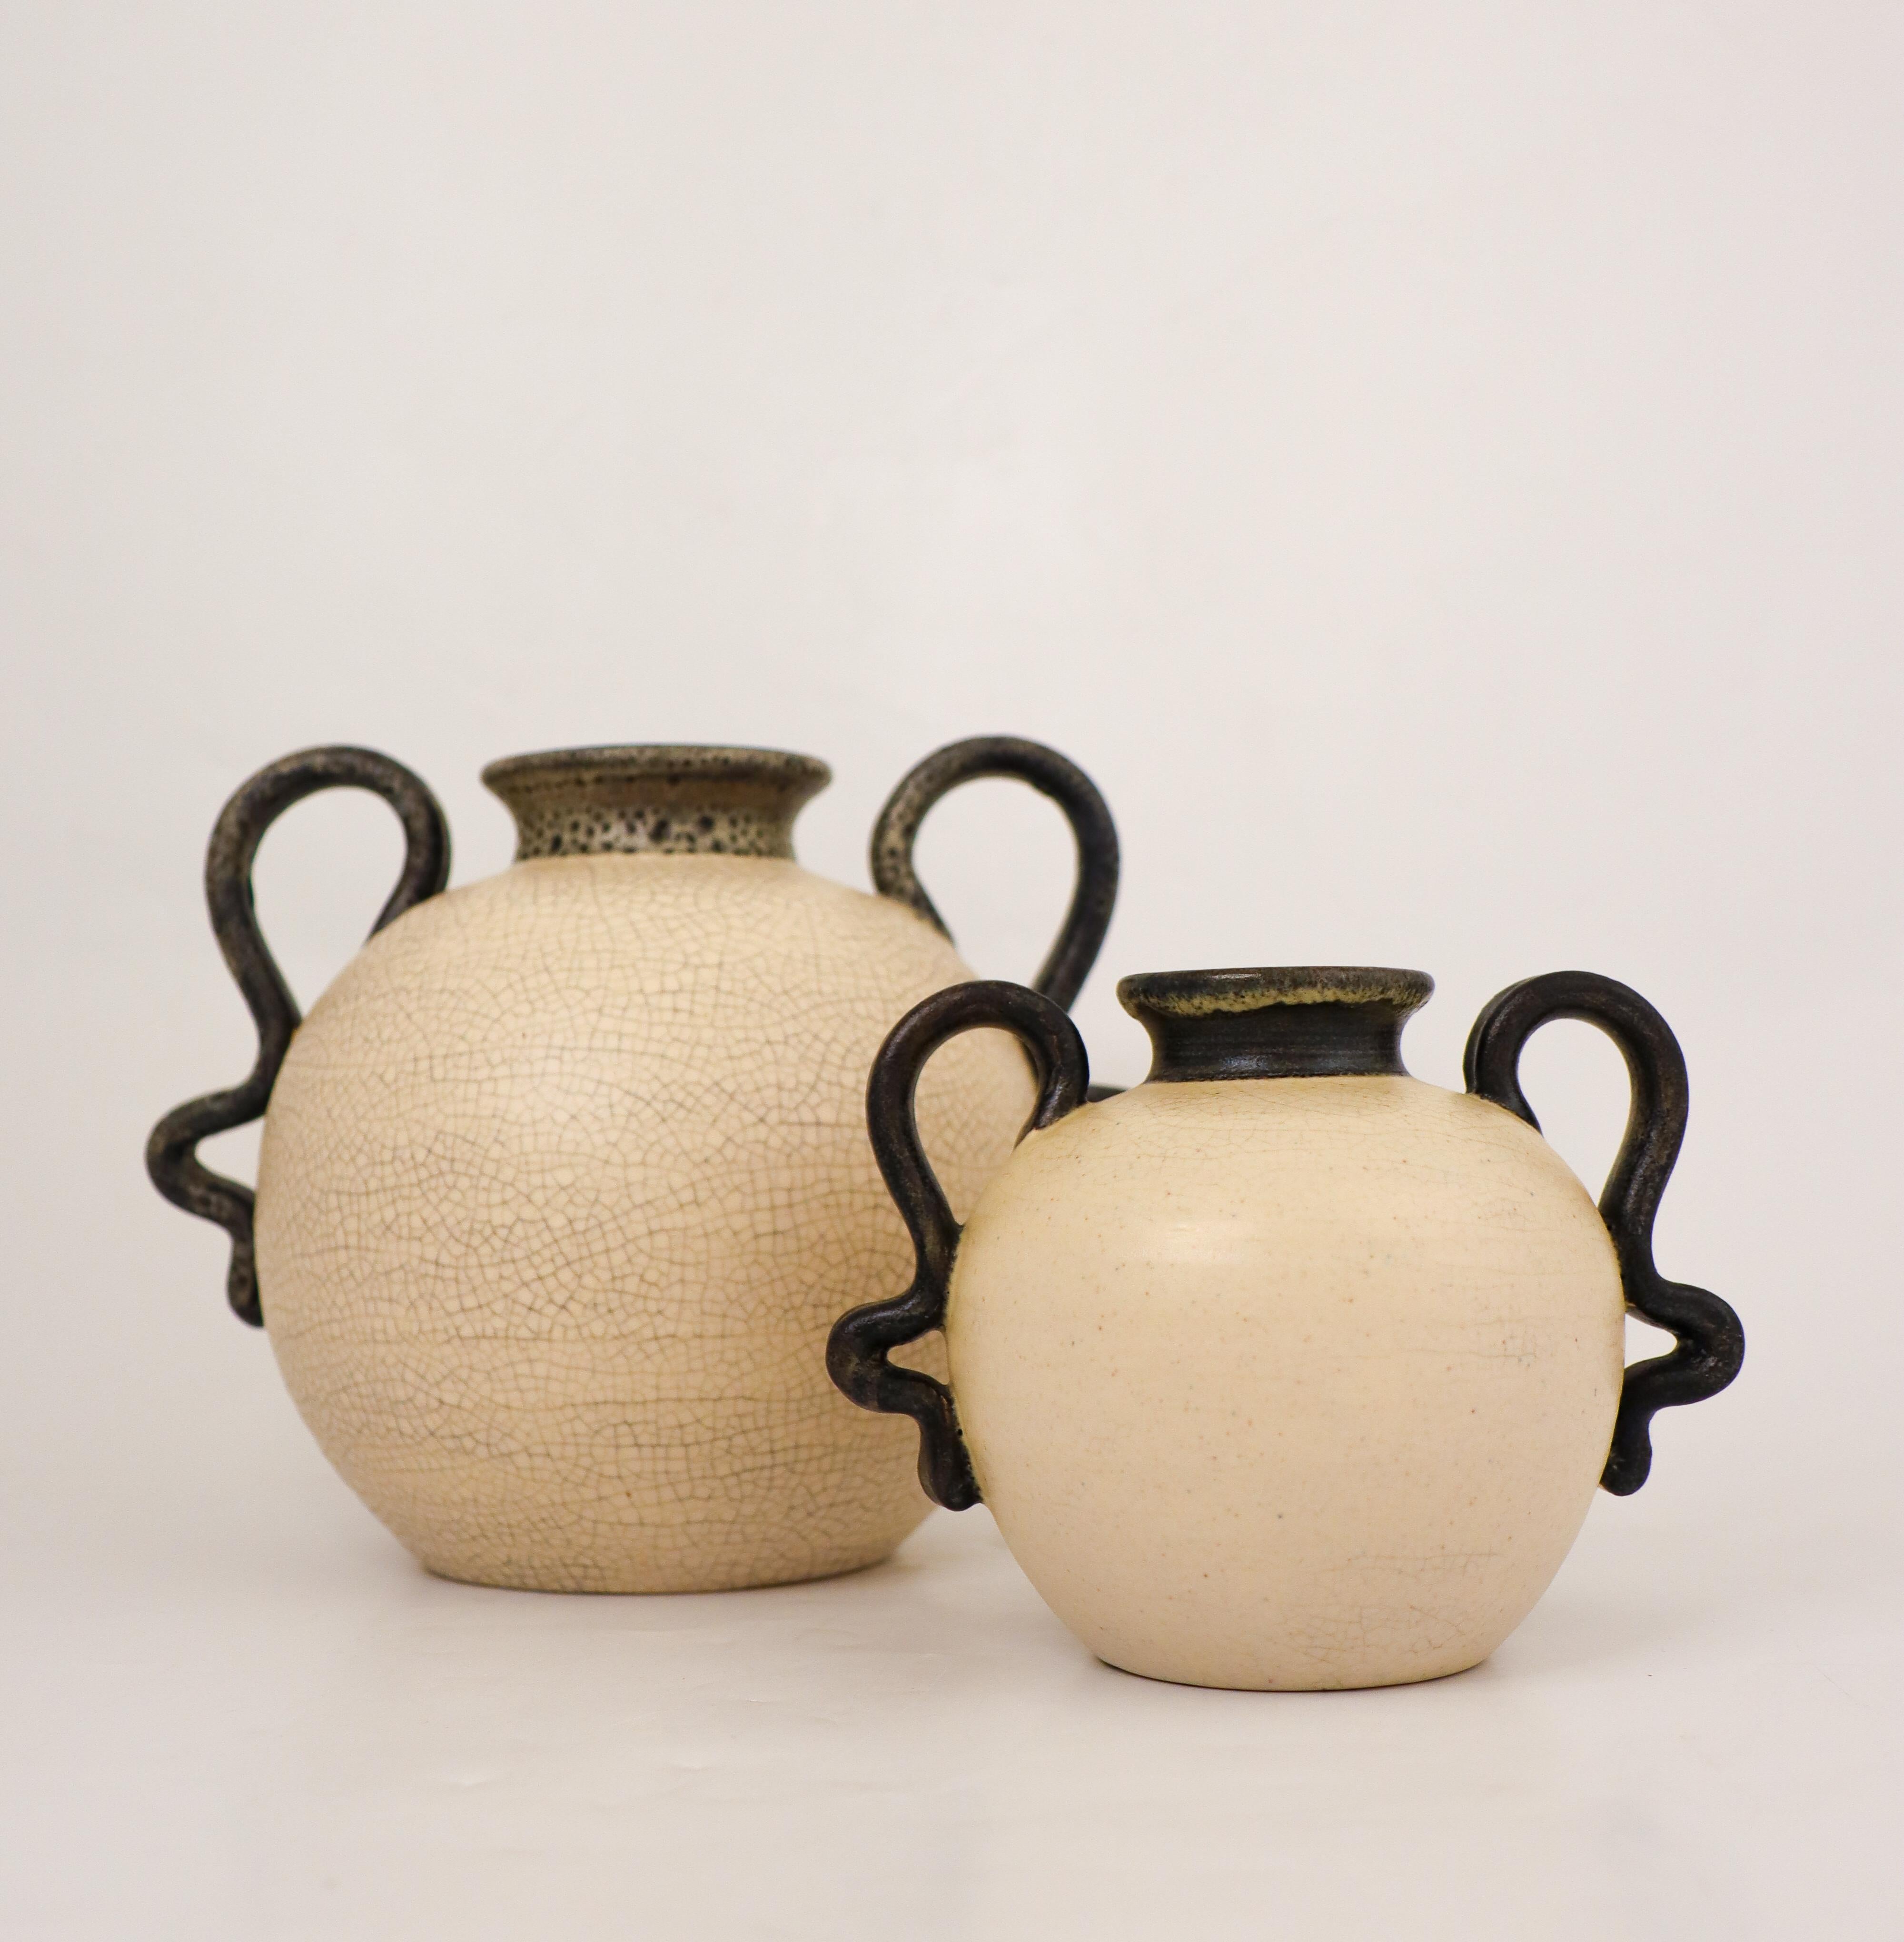 A pair of lovely creme colored vases with lovely handles designed by Eva Jancke-Björk at Bo Fajans in Gefle in the 1940s. The largest one is 16.5 cm high and 20 cm in diameter and the smaller one is 11 cm high and 14,5 cm in diameter. They do have